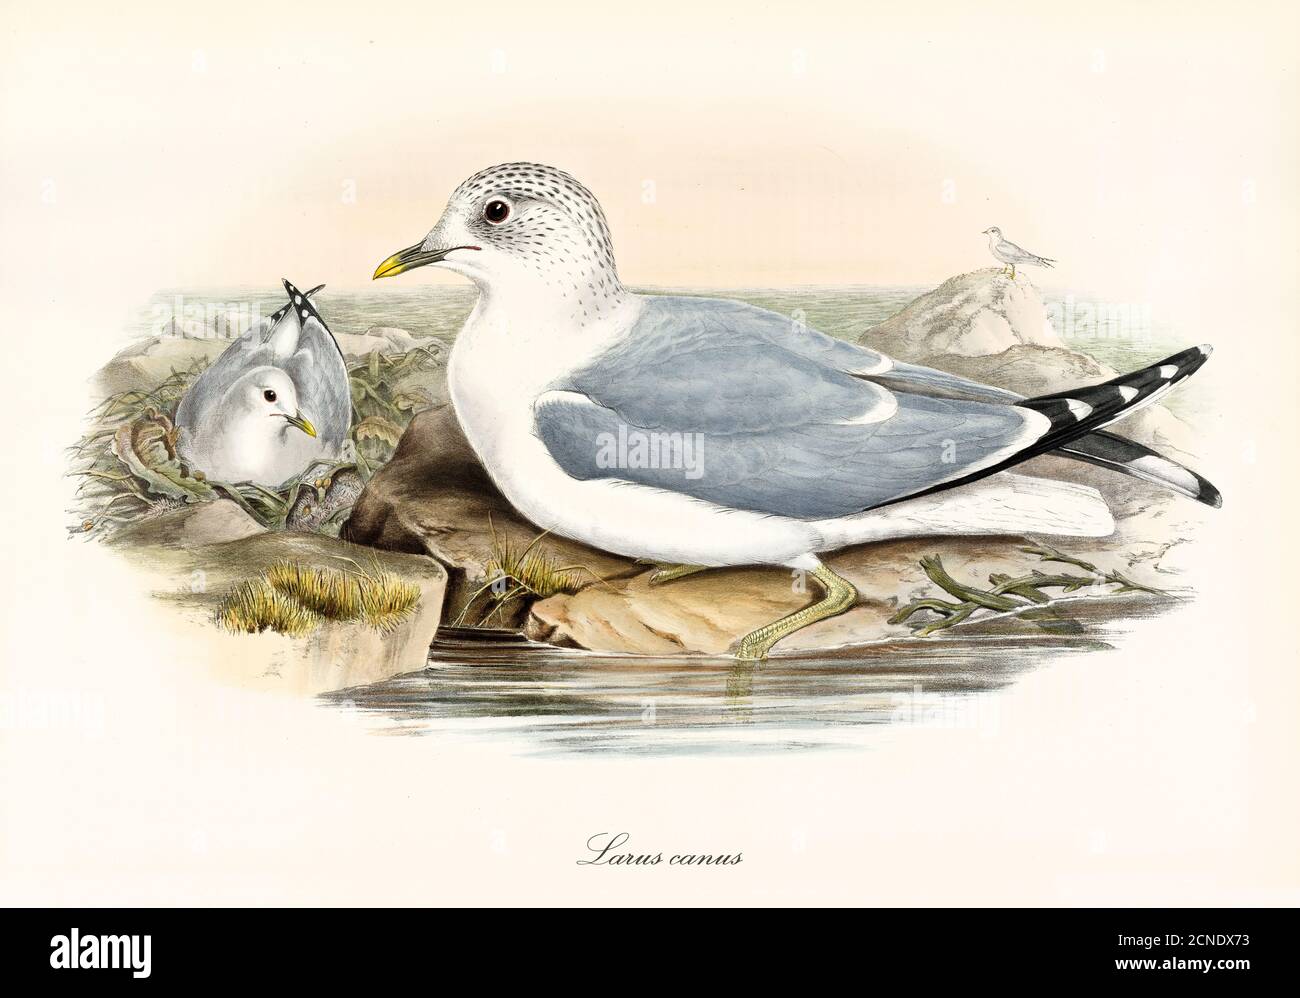 Common Gull (Larus canus) nesting on a rock with another bird close to body of water. Detailed vintage style watercolor art by John Gould 1862-1873 Stock Photo